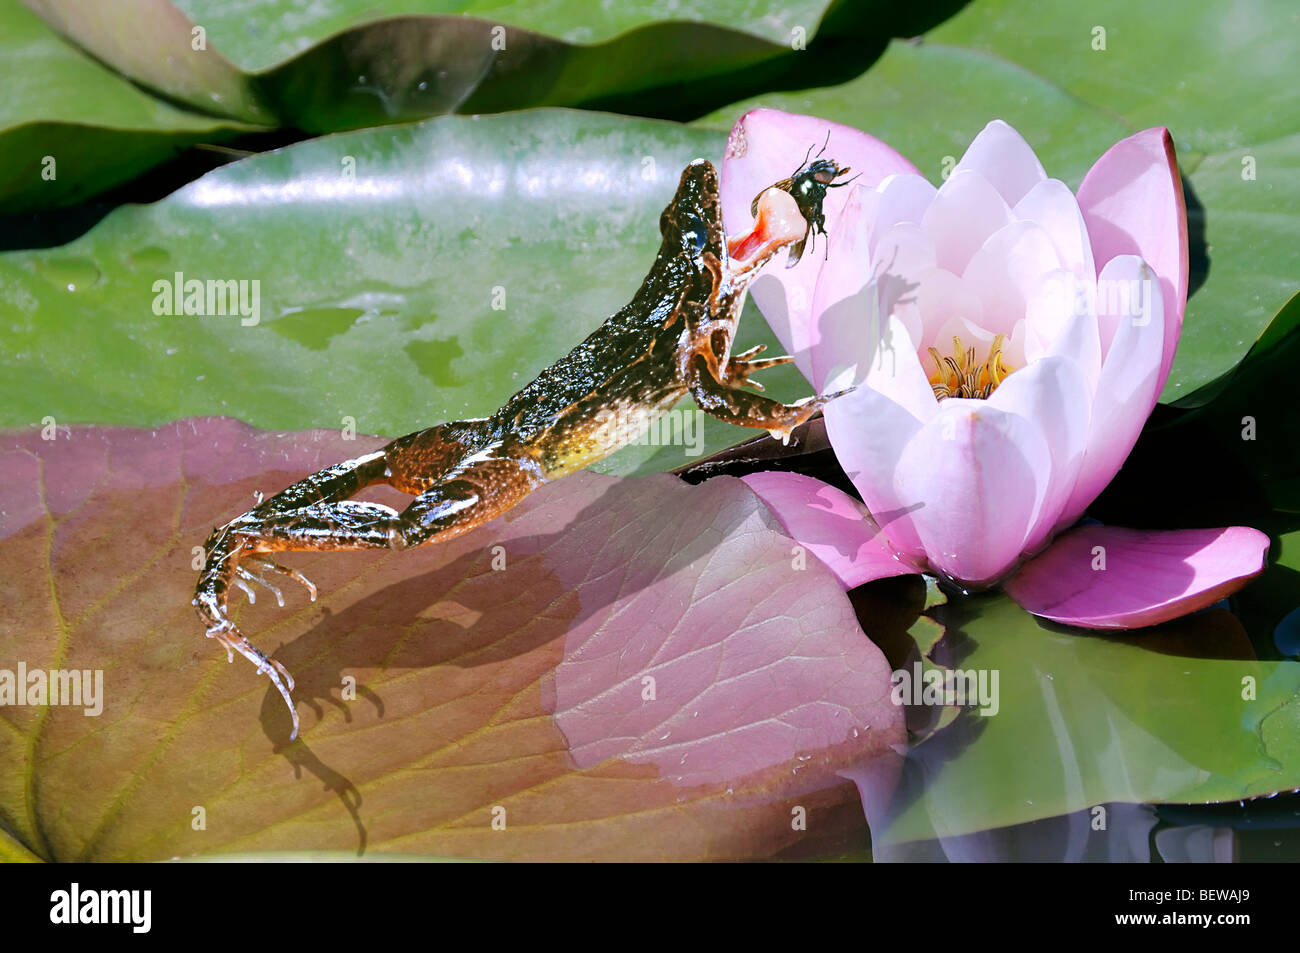 green frog (Rana lessonae) catching a fly, elevated view Stock Photo